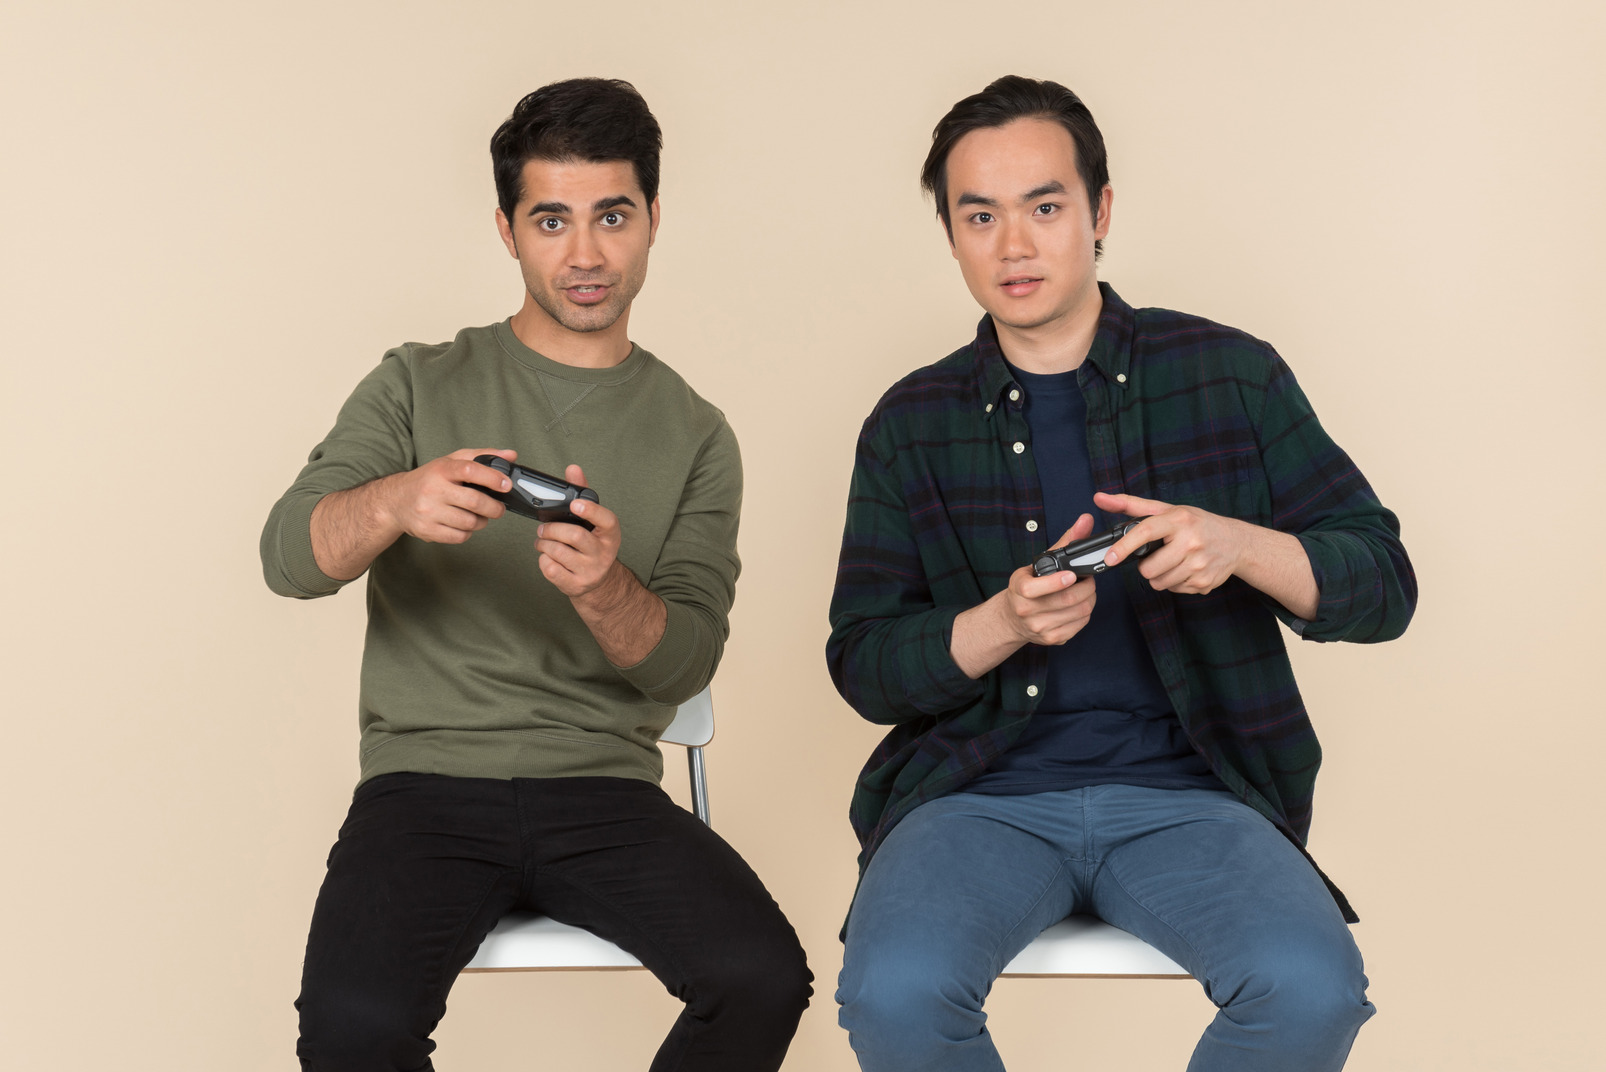 Interracial friends sitting in chairs and playing video games